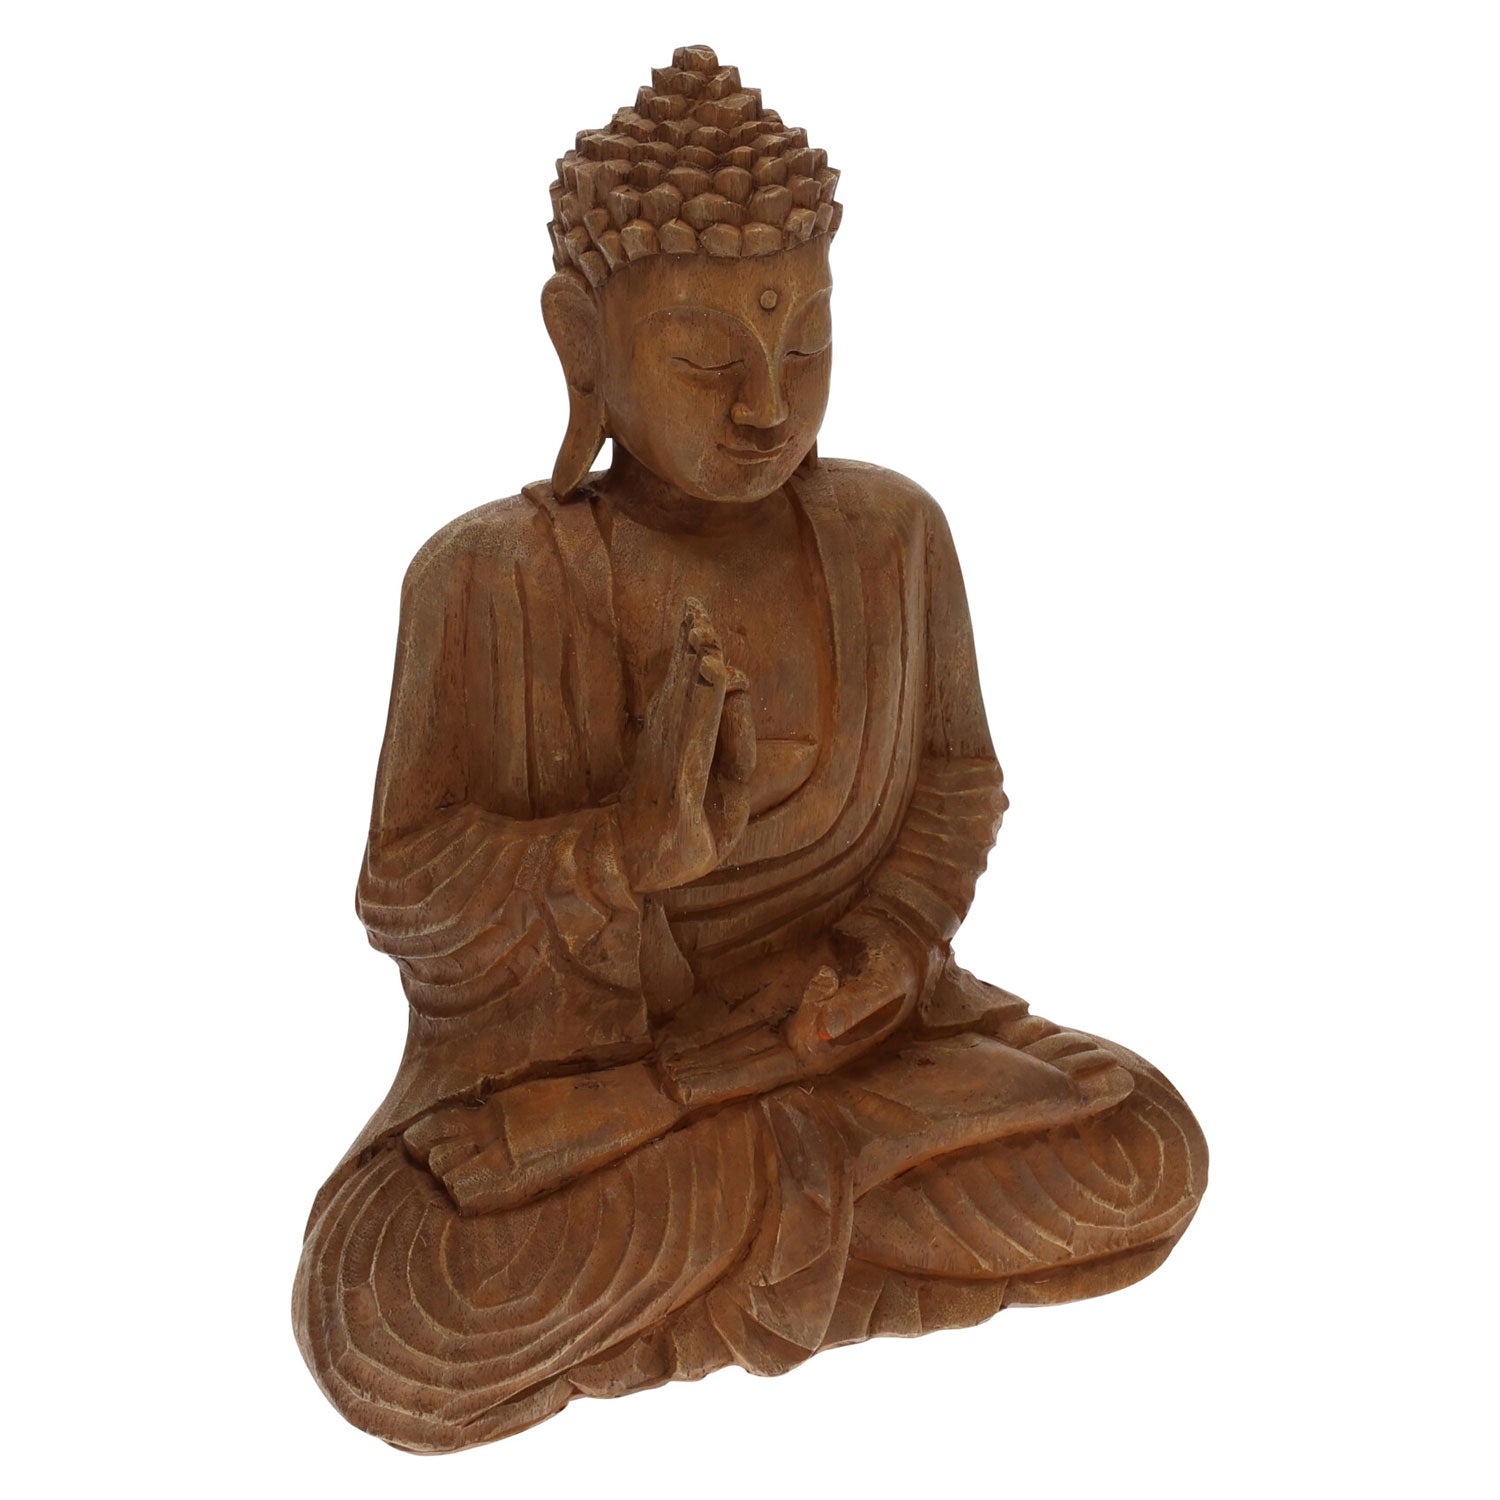 The Home Buddha Polystone 1 Shaws Department Stores